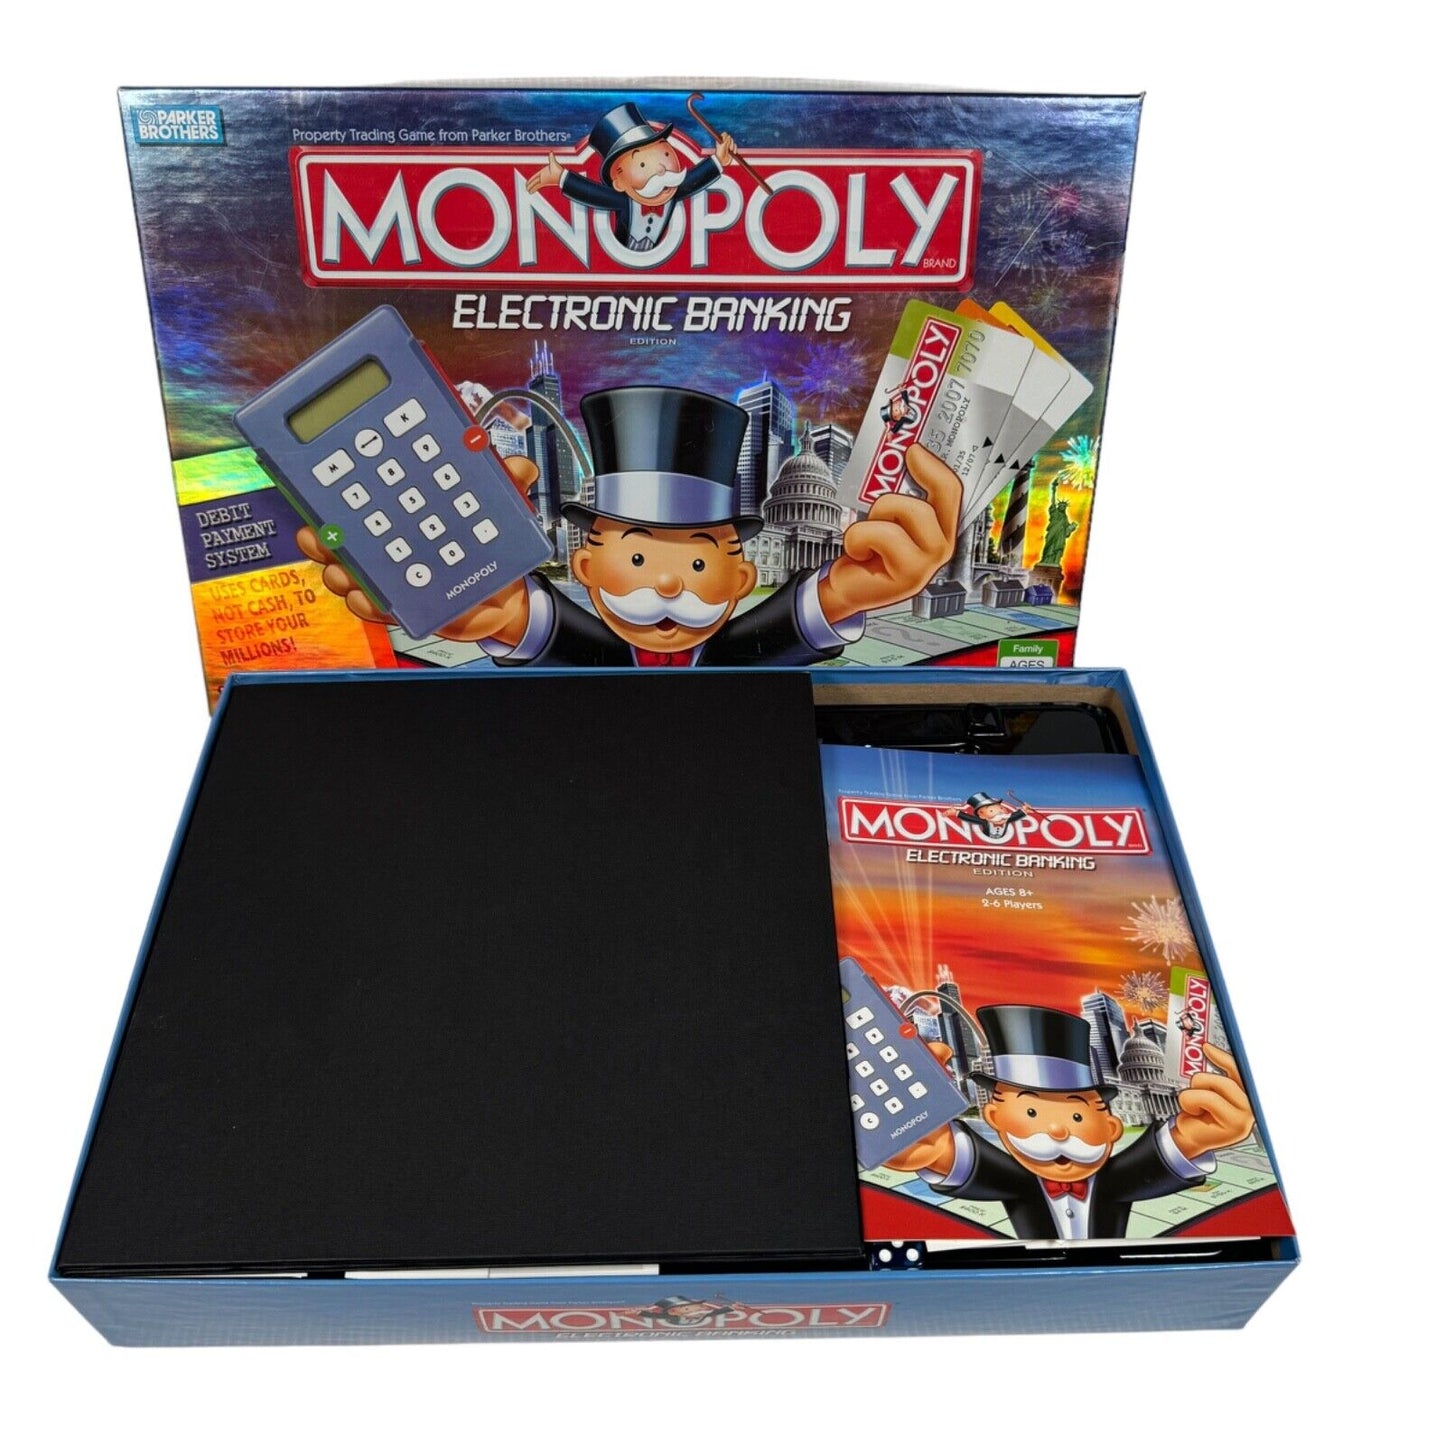 MONOPOLY Electronic Banking Edition Board Game 2007 Parker Brothers